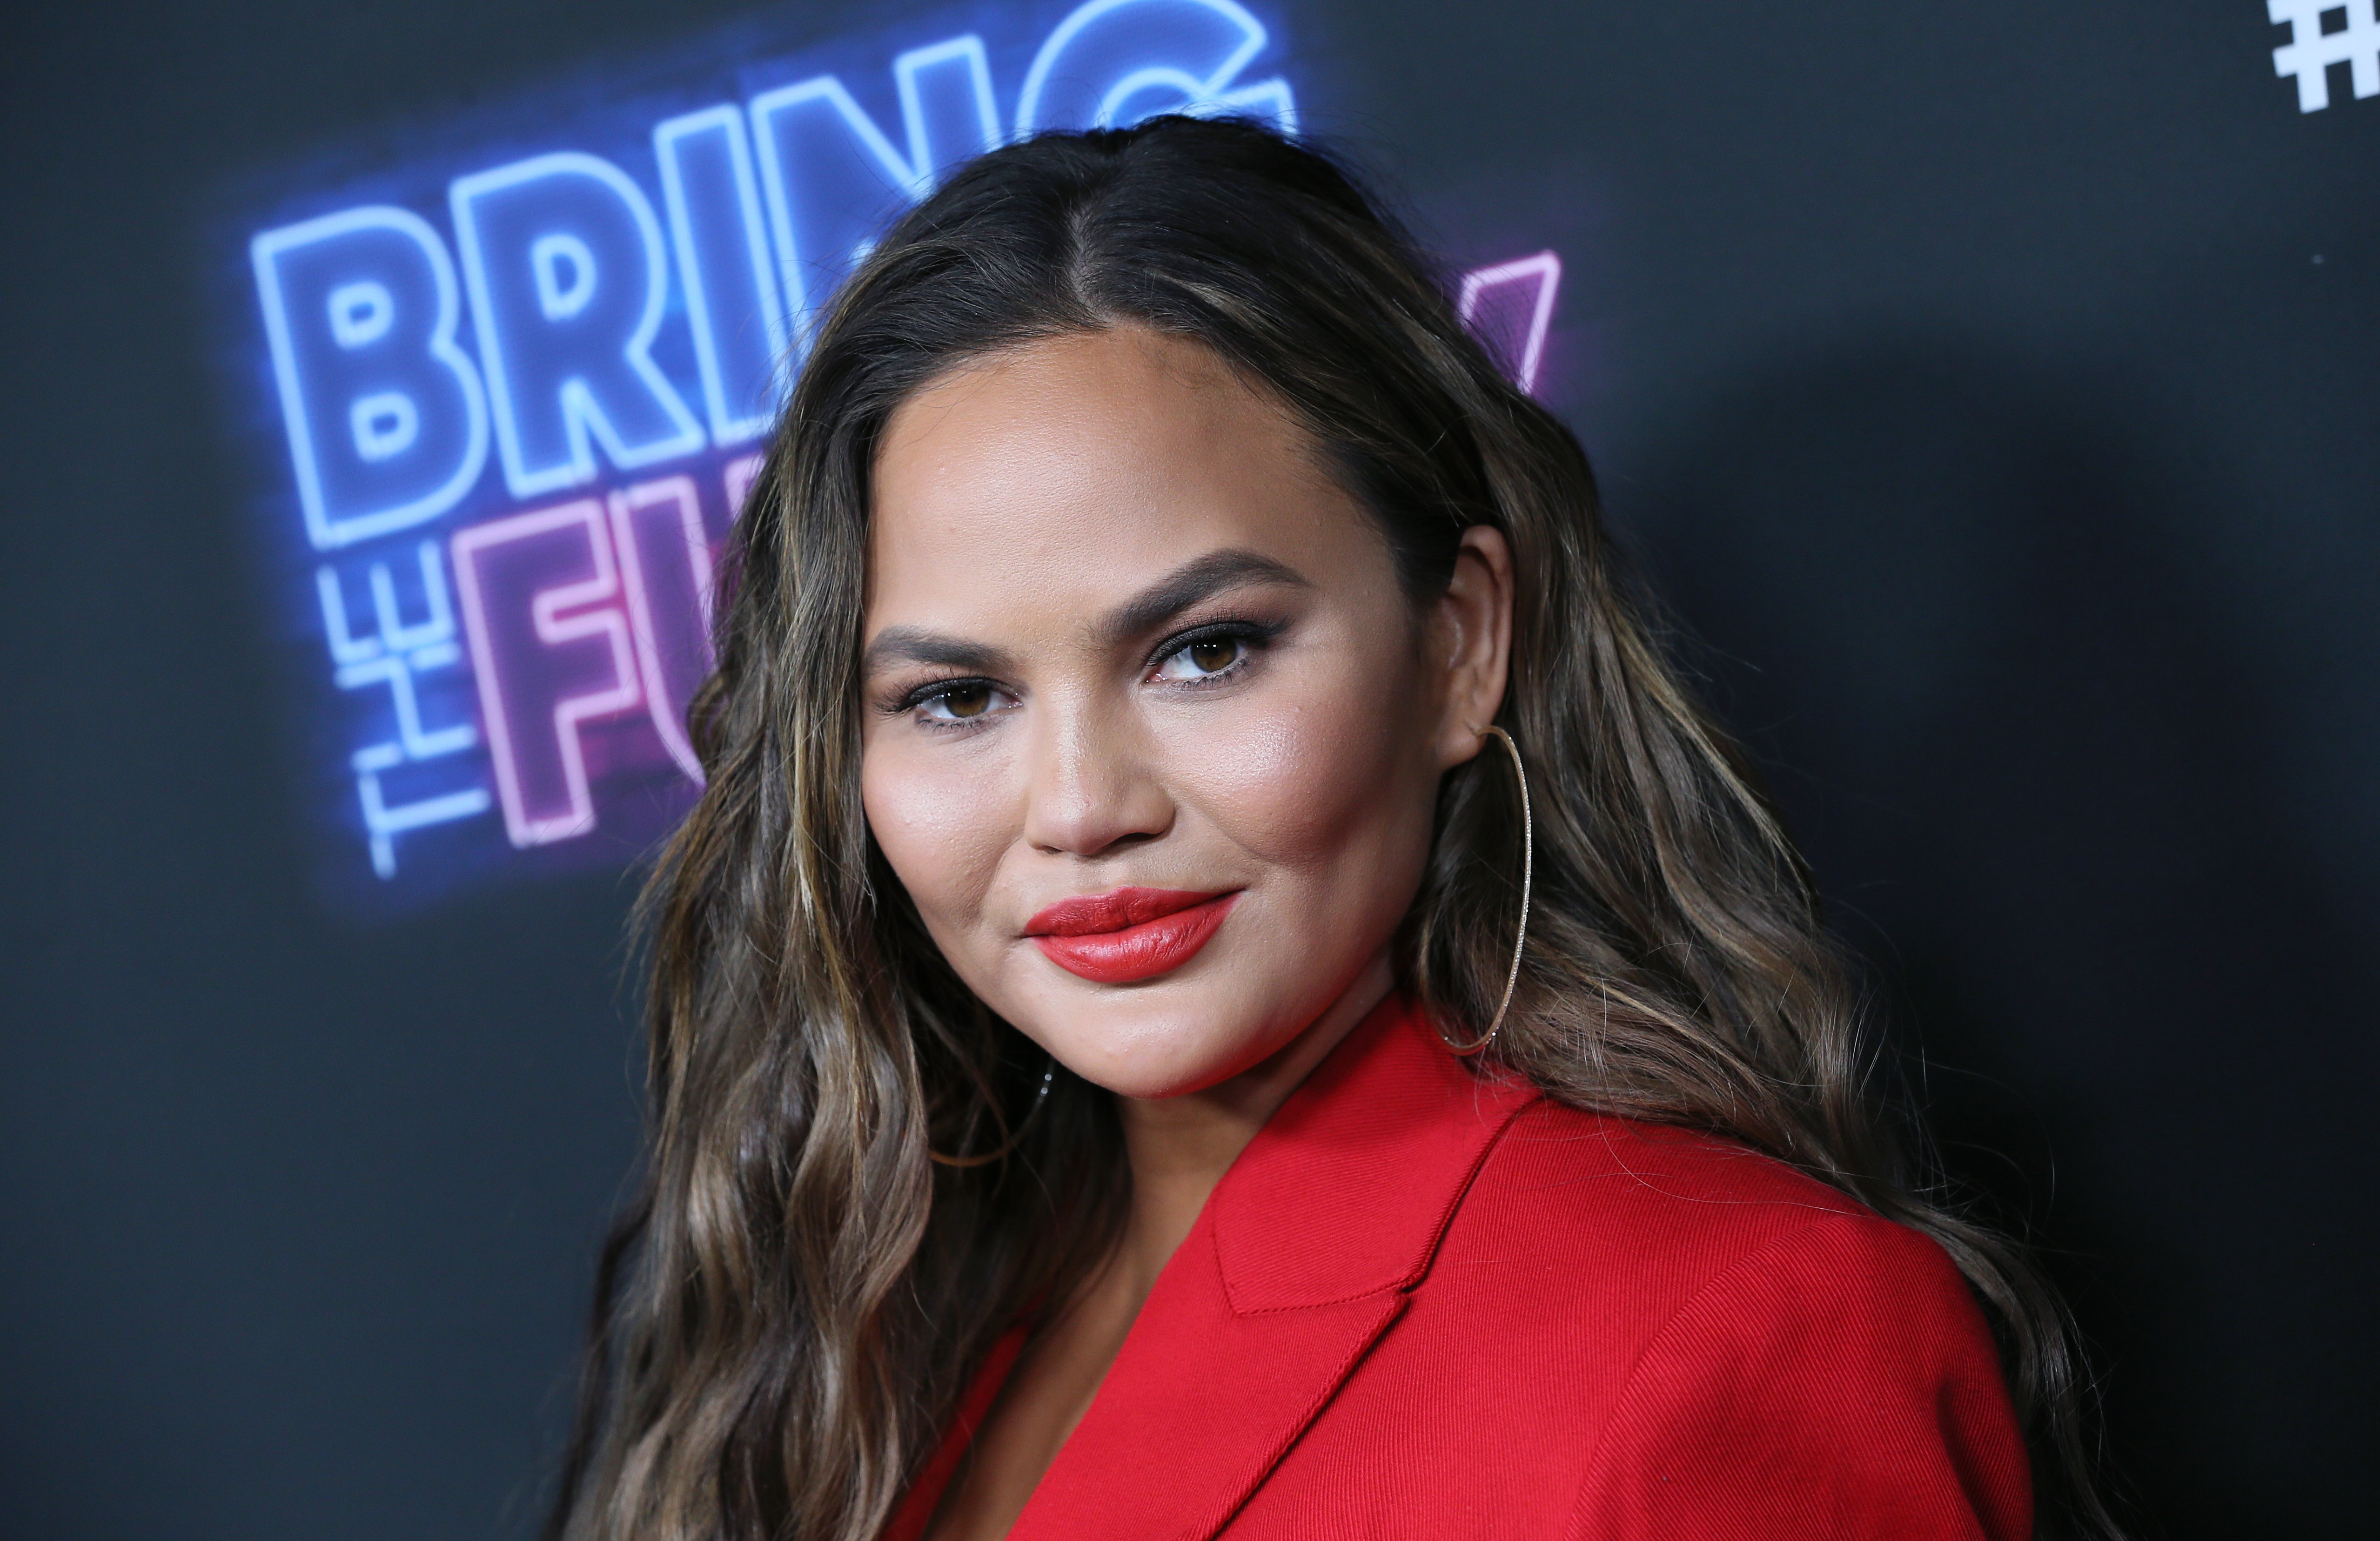 Chrissy Teigen pictured at the premiere of NBC's "Bring The Funny" at Rockwell Table & Stage, 2019, California. | Photo: Getty Images